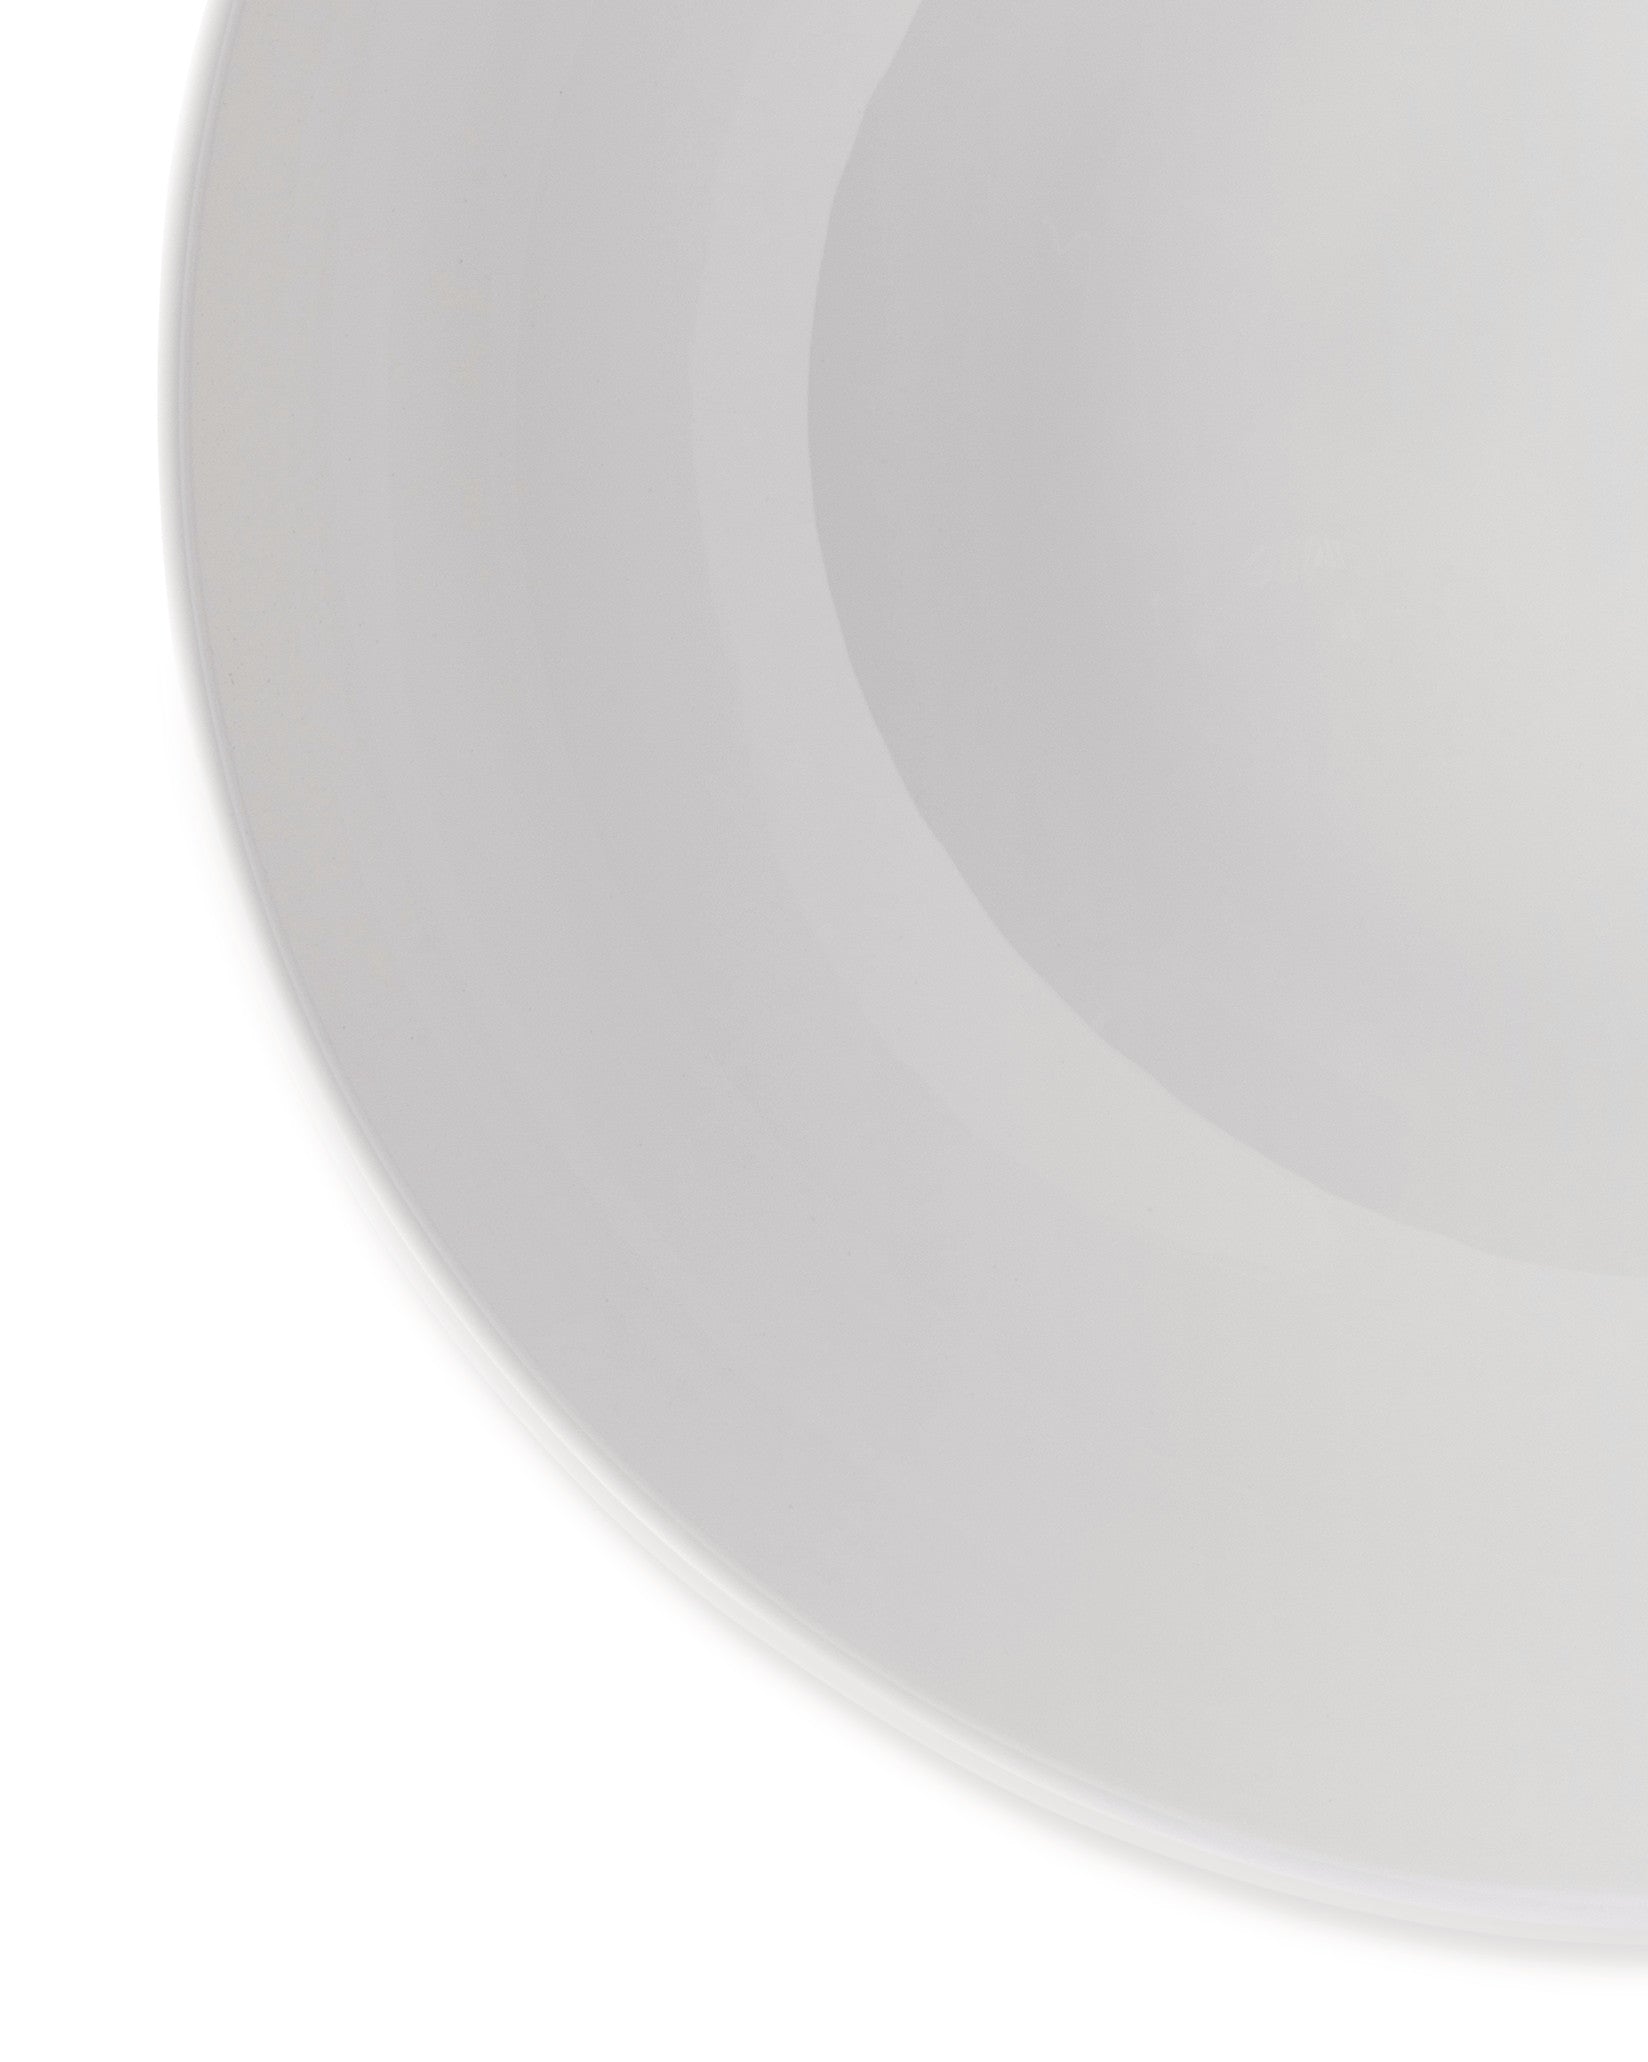 All-Time - Salad serving bowl – Alessi USA Inc